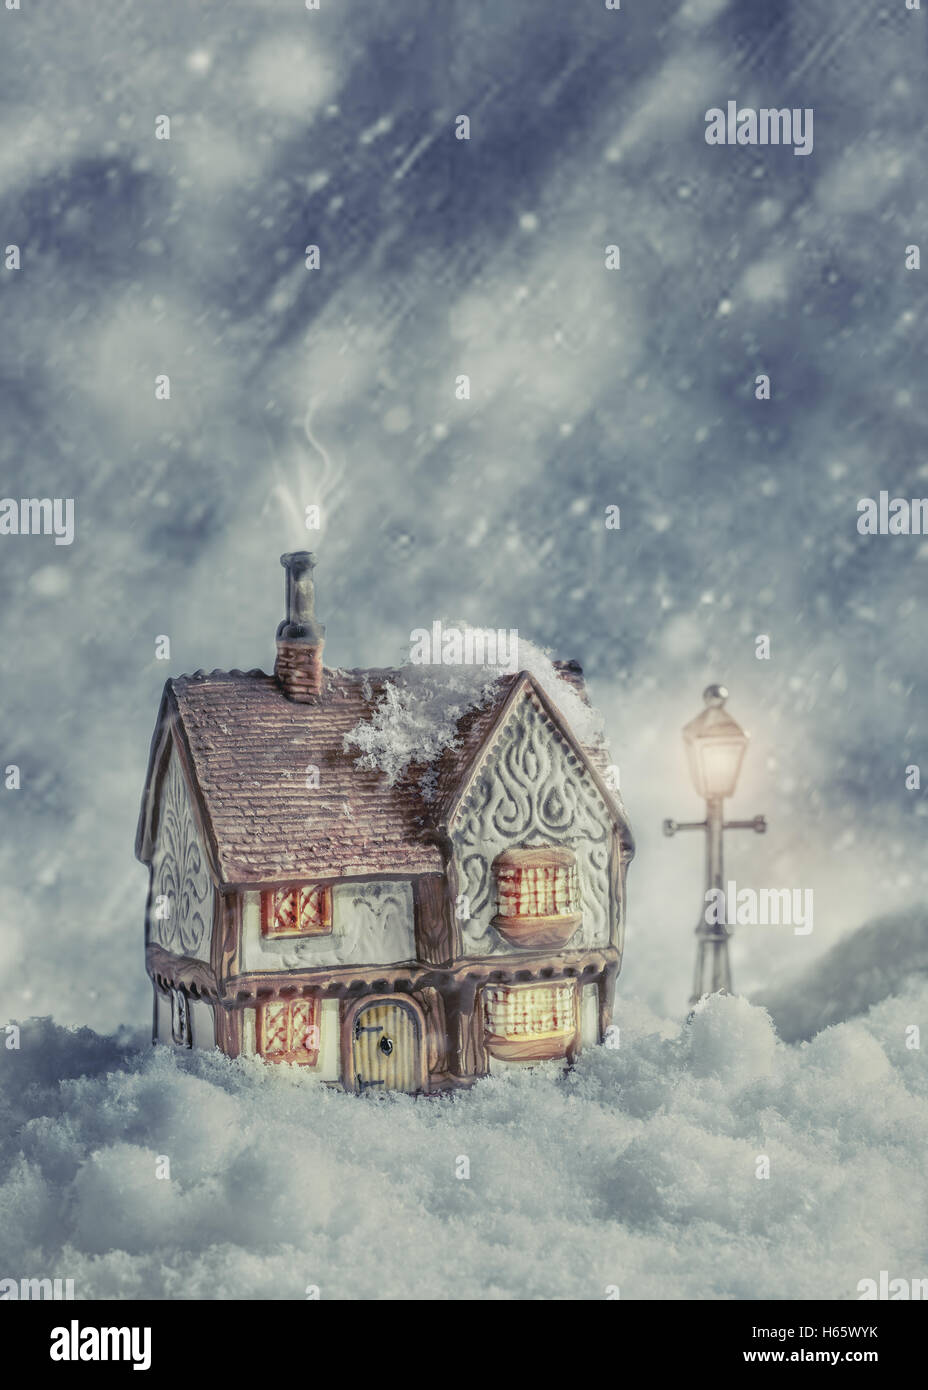 Winter cottage in snow Stock Photo